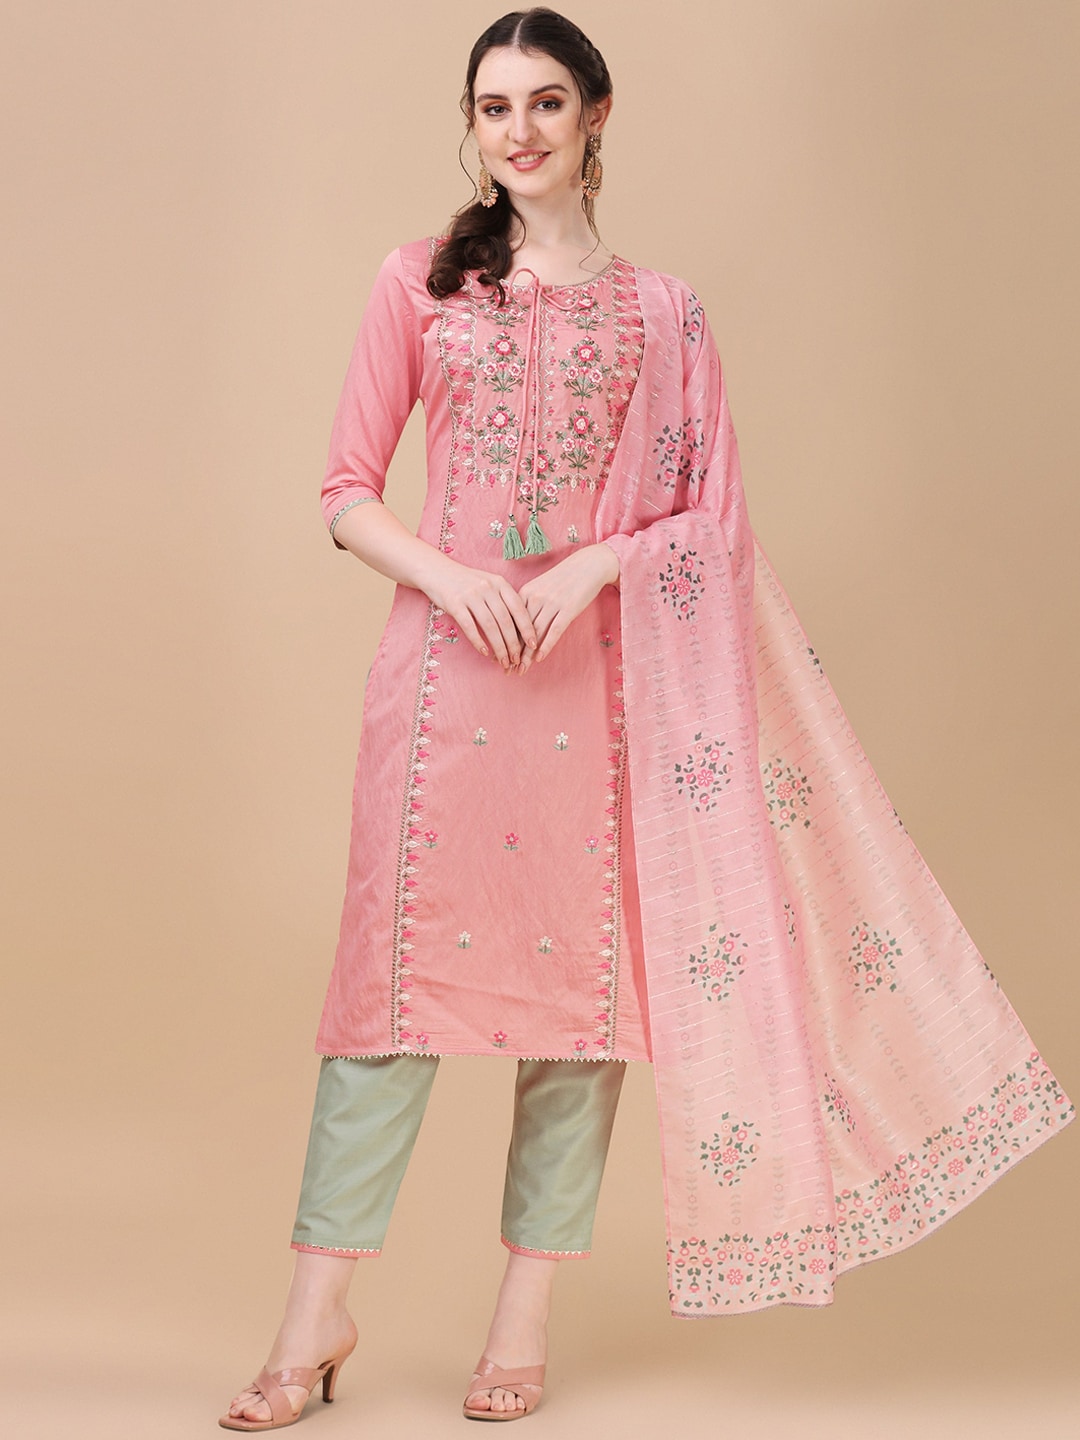 Berrylicious Pink Floral Embroidered Thread Work Chanderi Cotton Kurta with Trousers & Dupatta Price in India